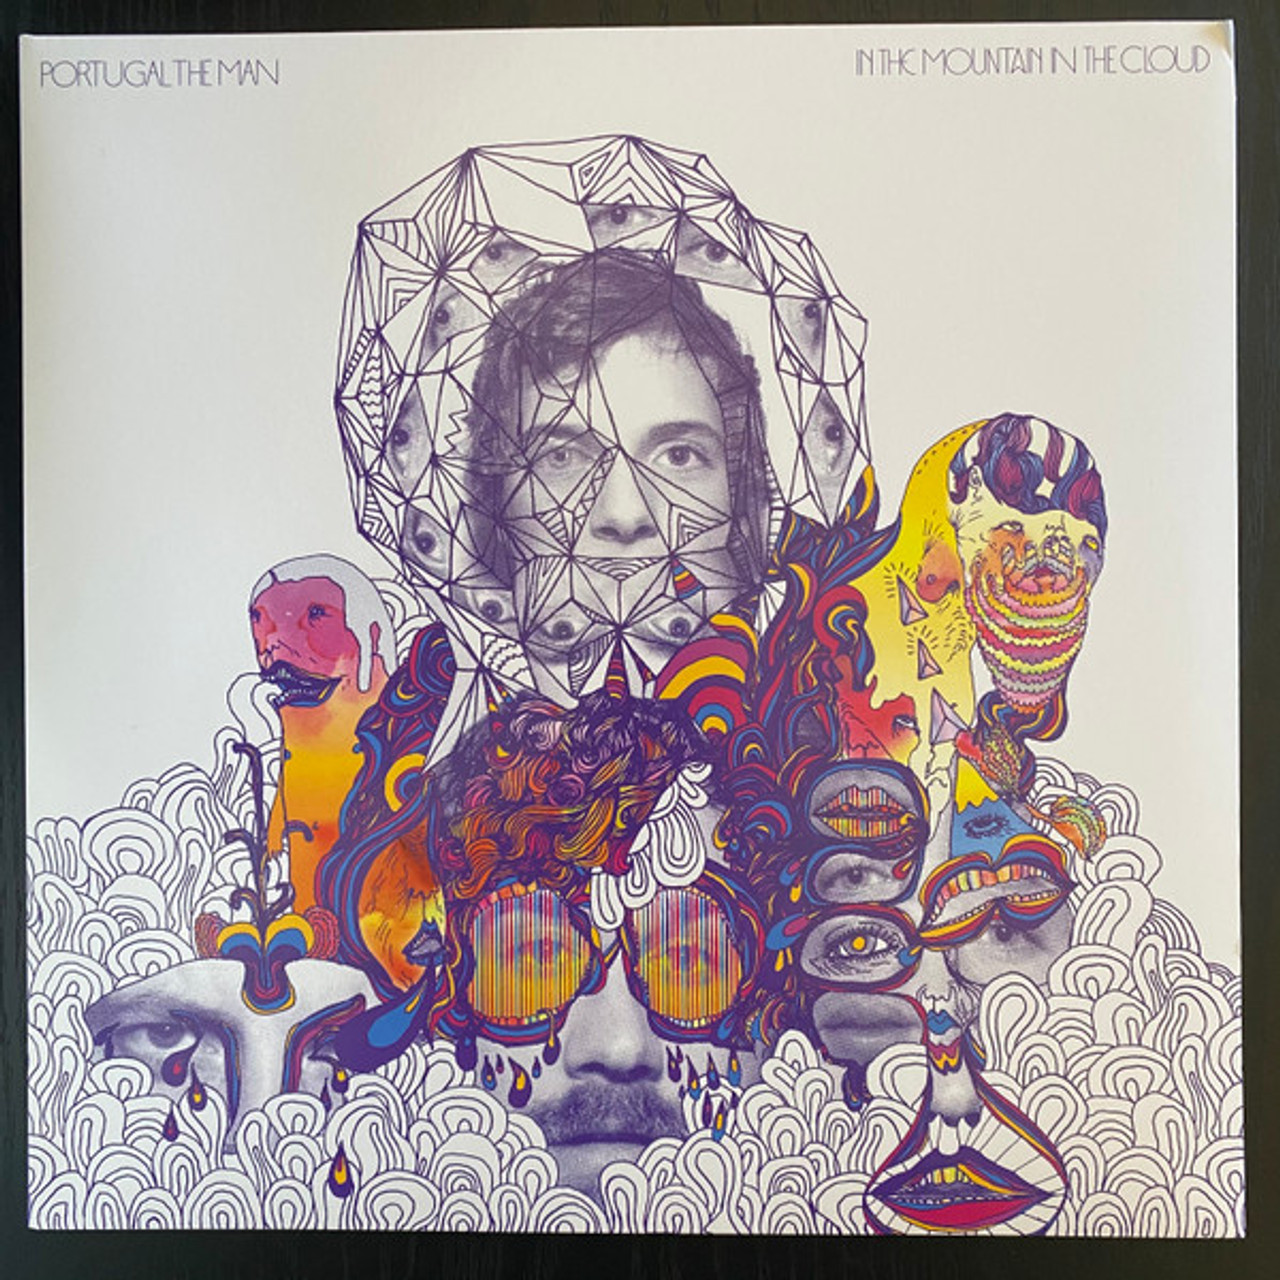 In The Mountain In The Cloud - Portugal The Man (#075678641862) - Omega  Music